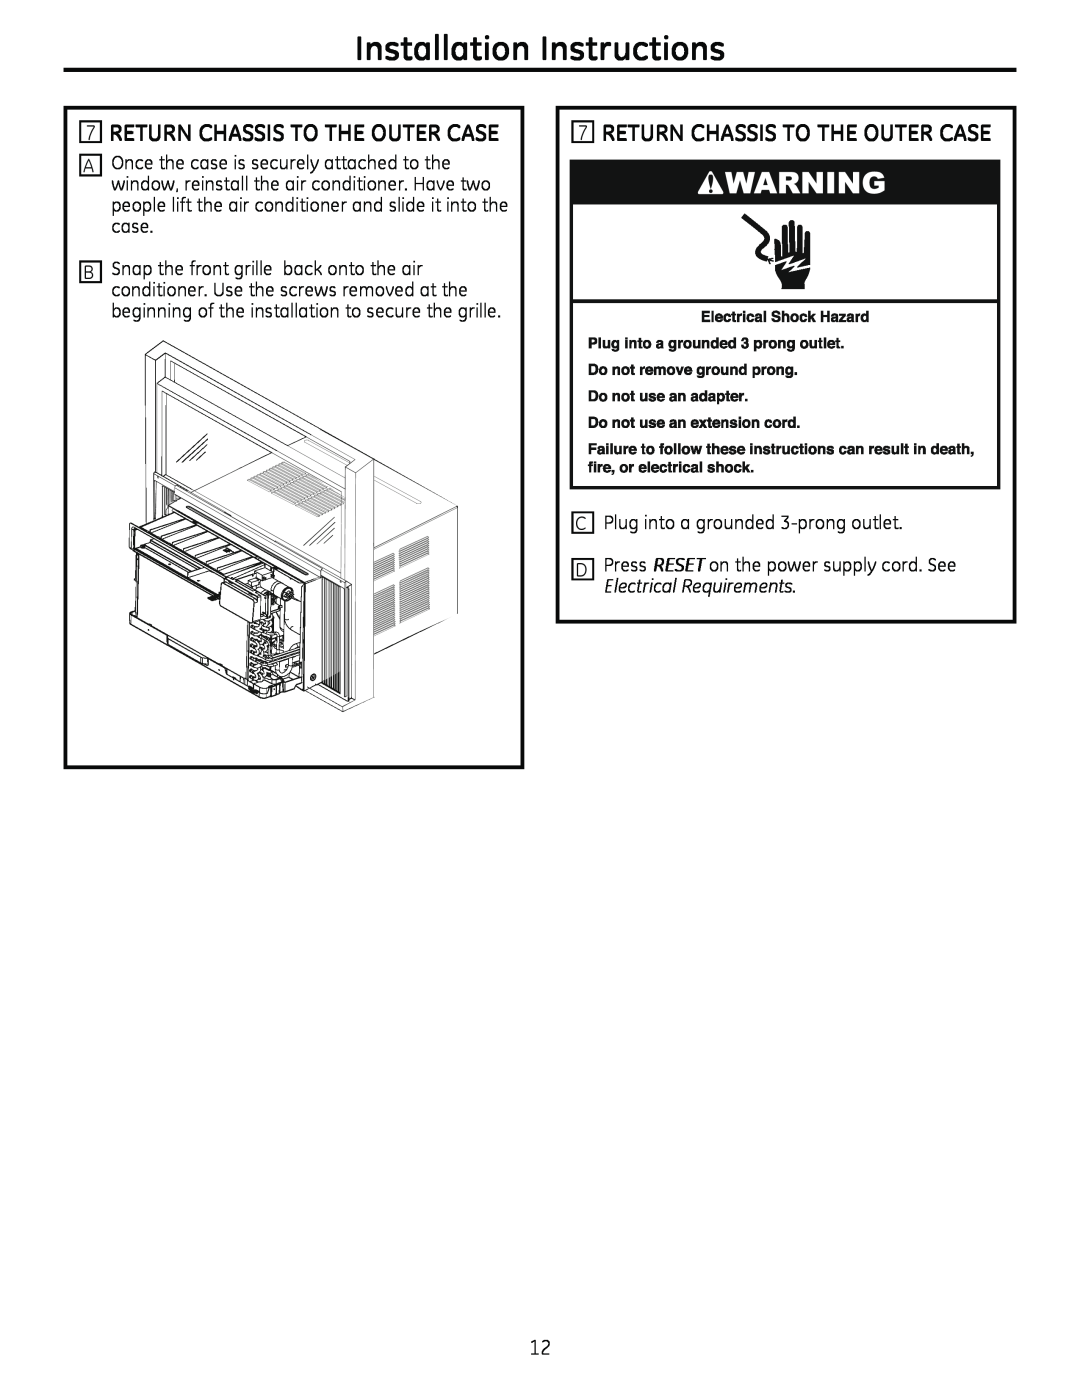 GE AHM18 operating instructions 7RETURN CHASSIS TO THE OUTER CASE, Installation Instructions 